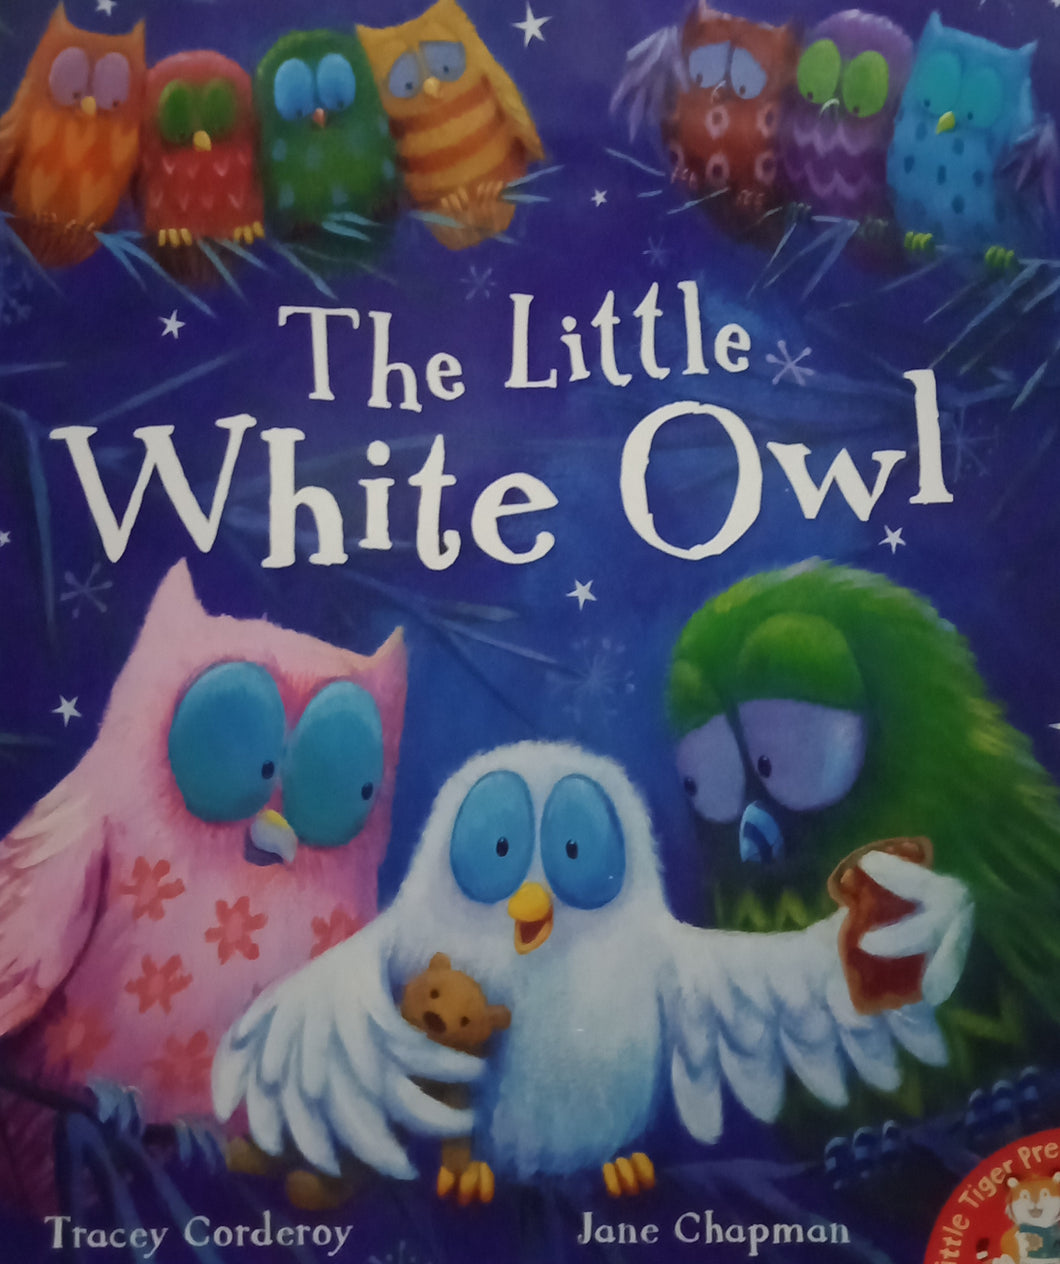 The Little White Owl by Tracey Corderoy